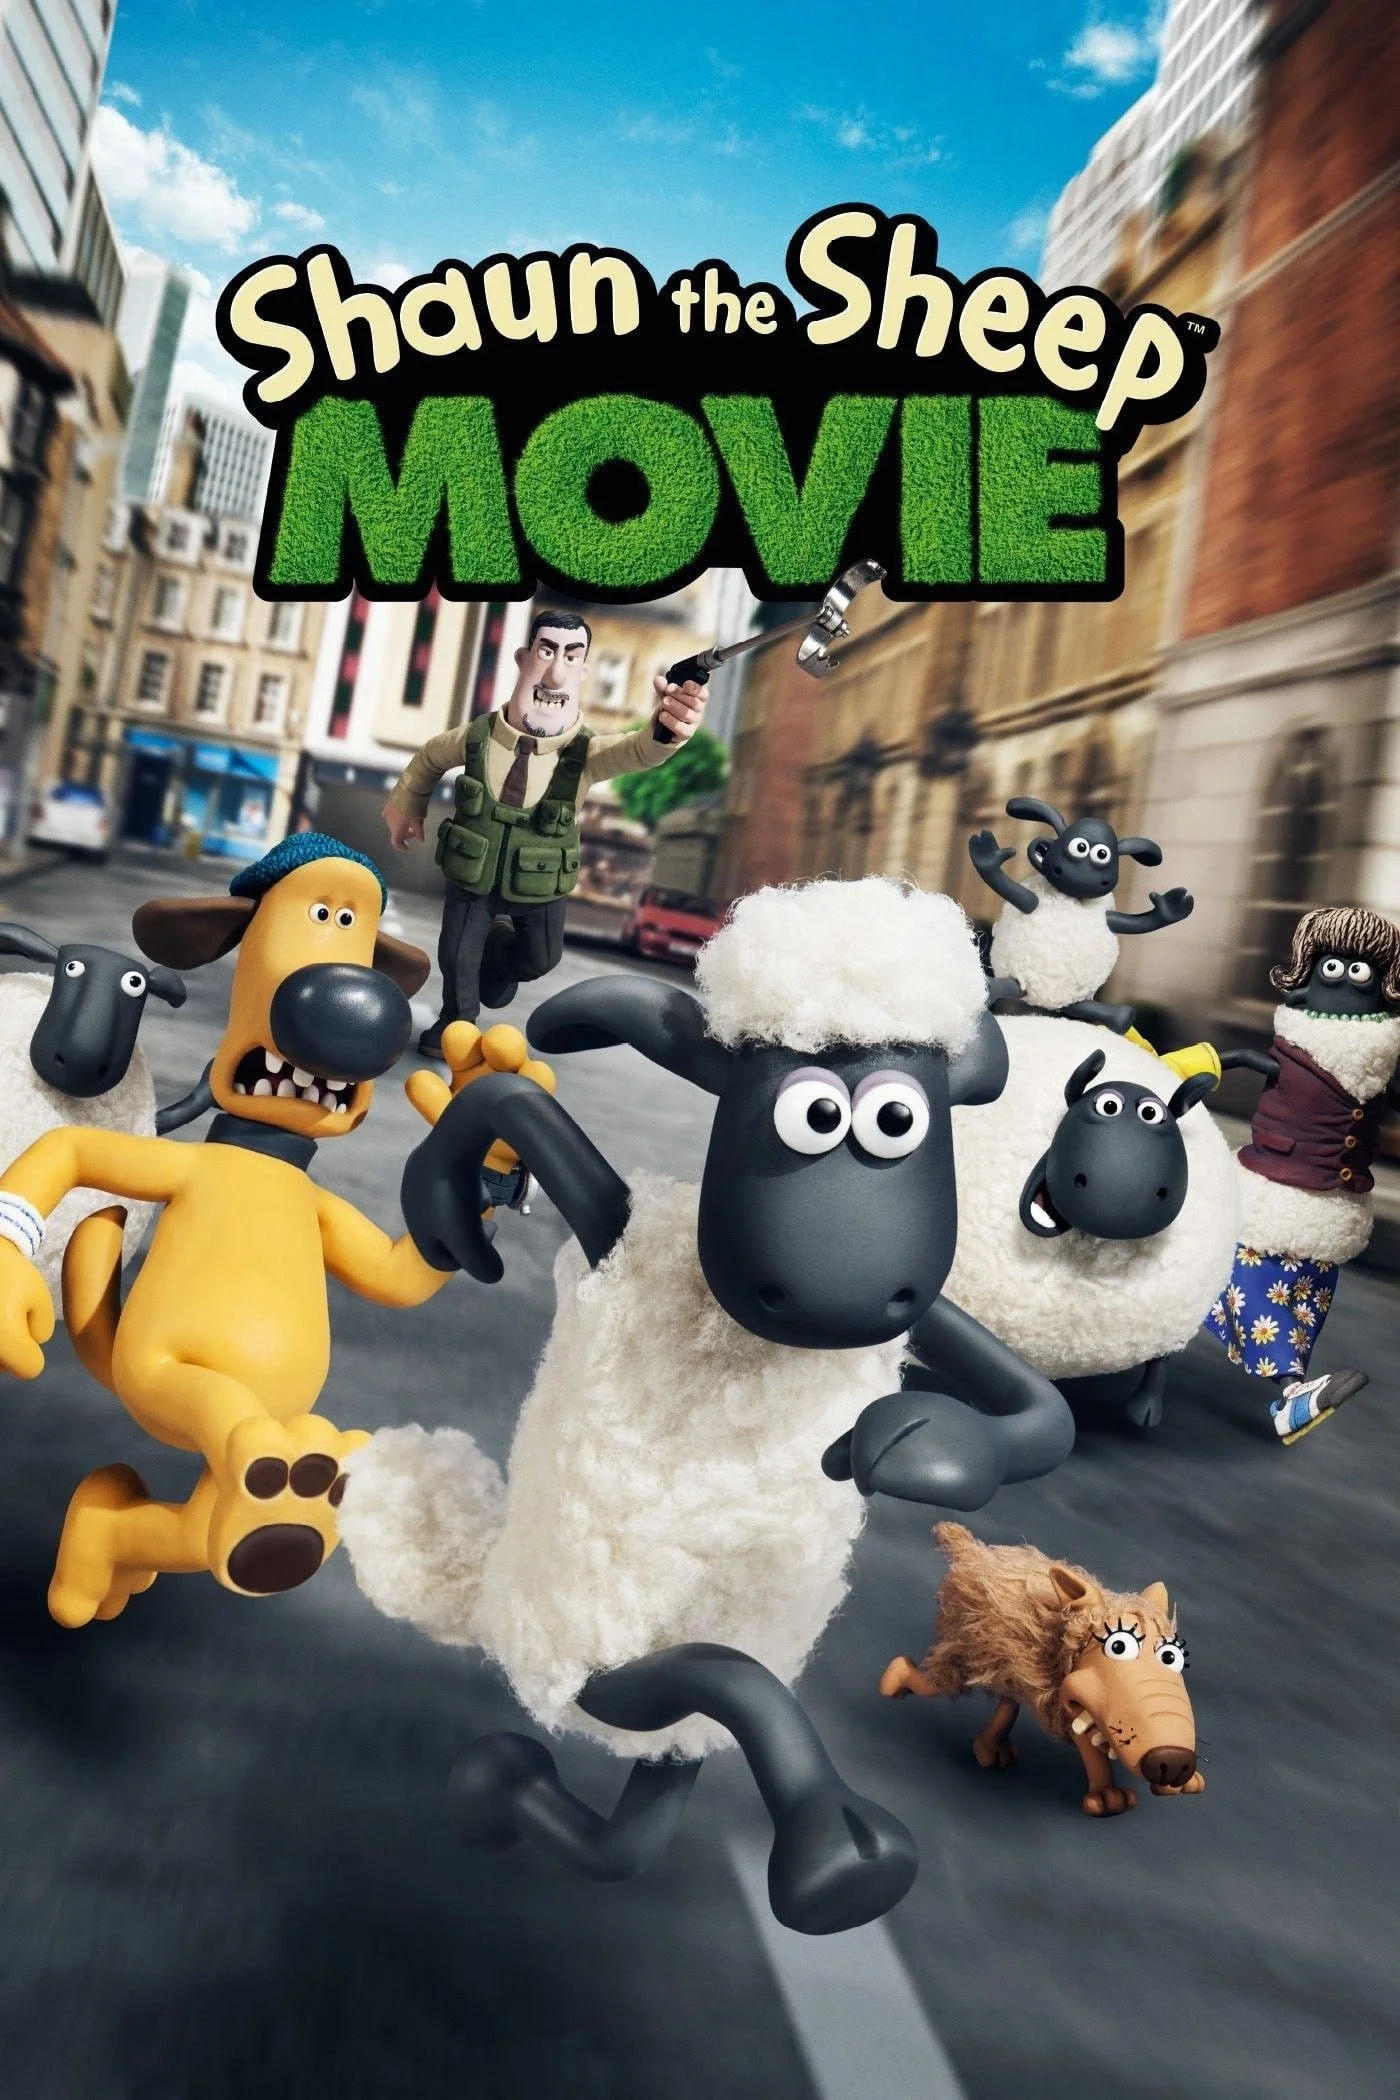 Ranking Aardman Animations: A Box Office Gross Overview of Beloved Movies